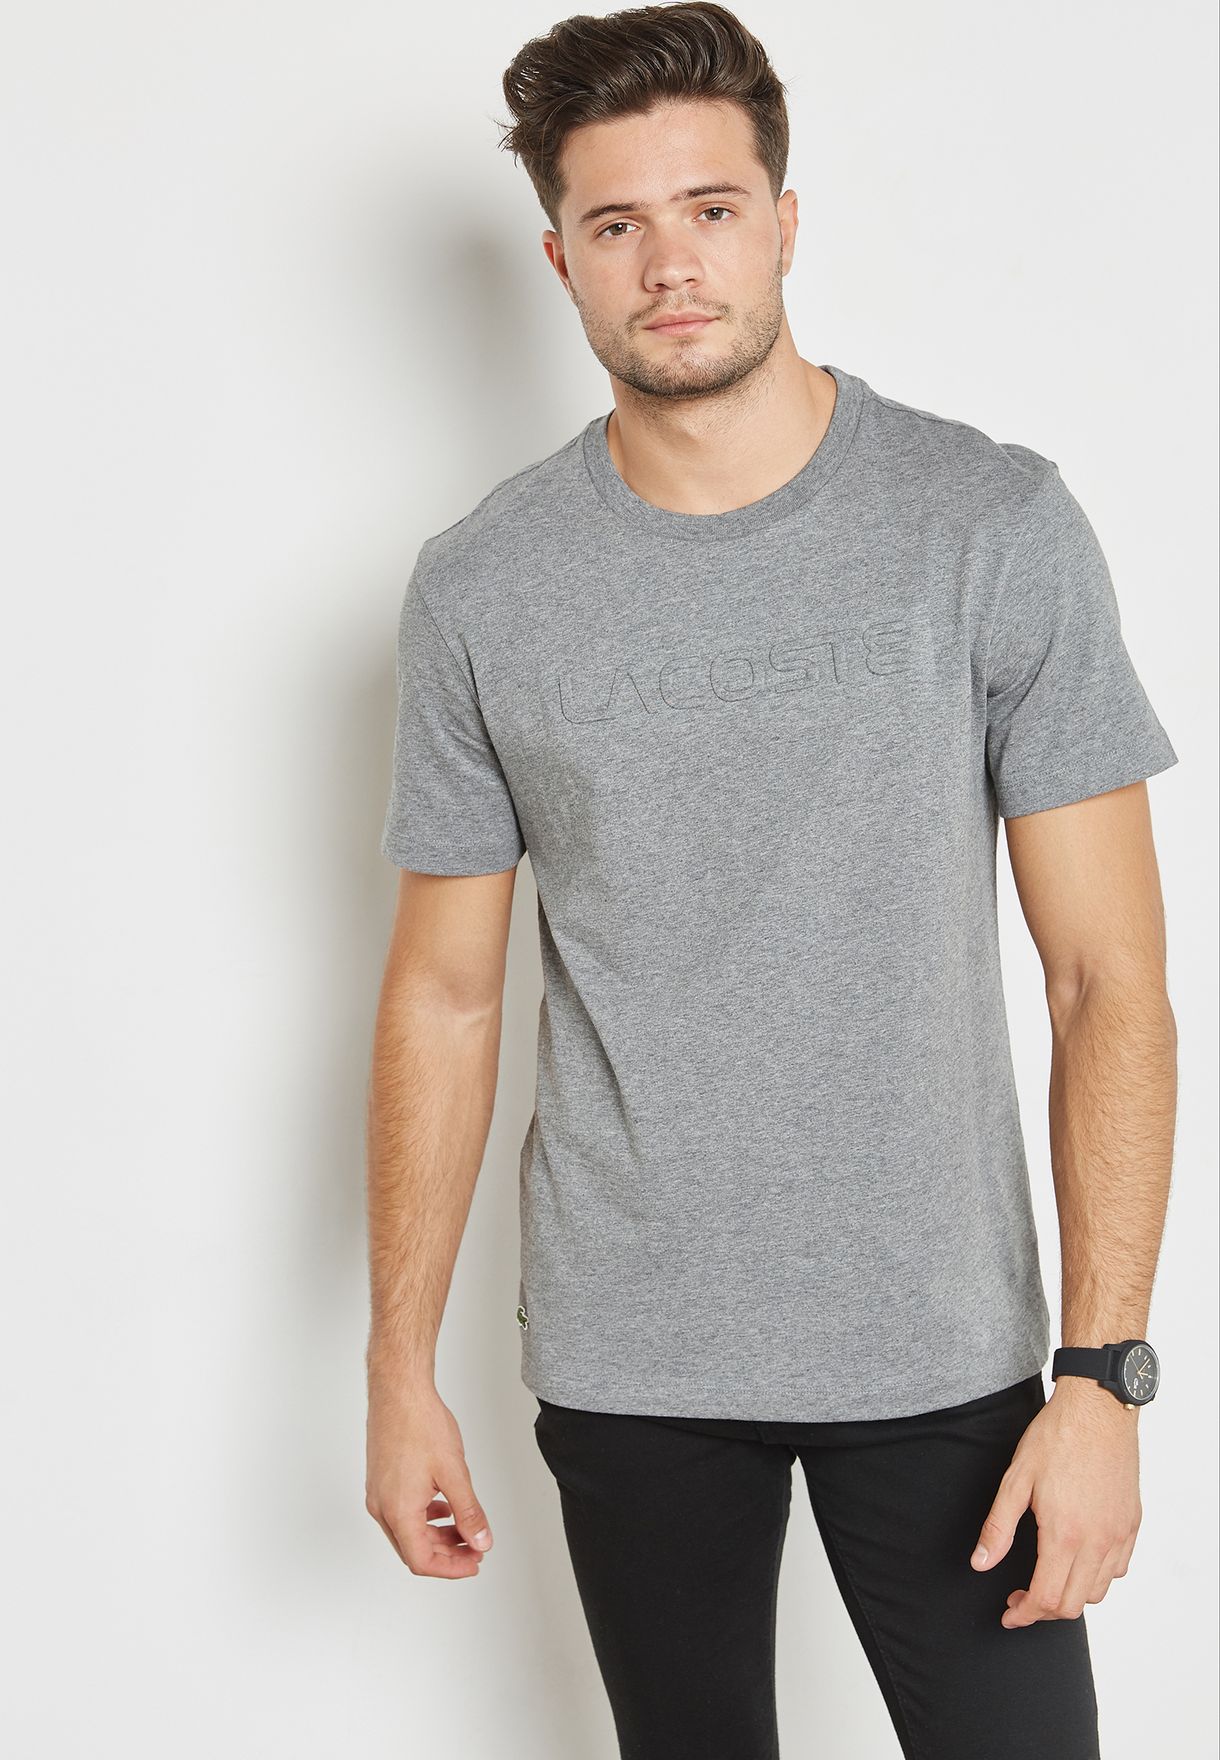 Buy Lacoste grey Essential T-Shirt for 